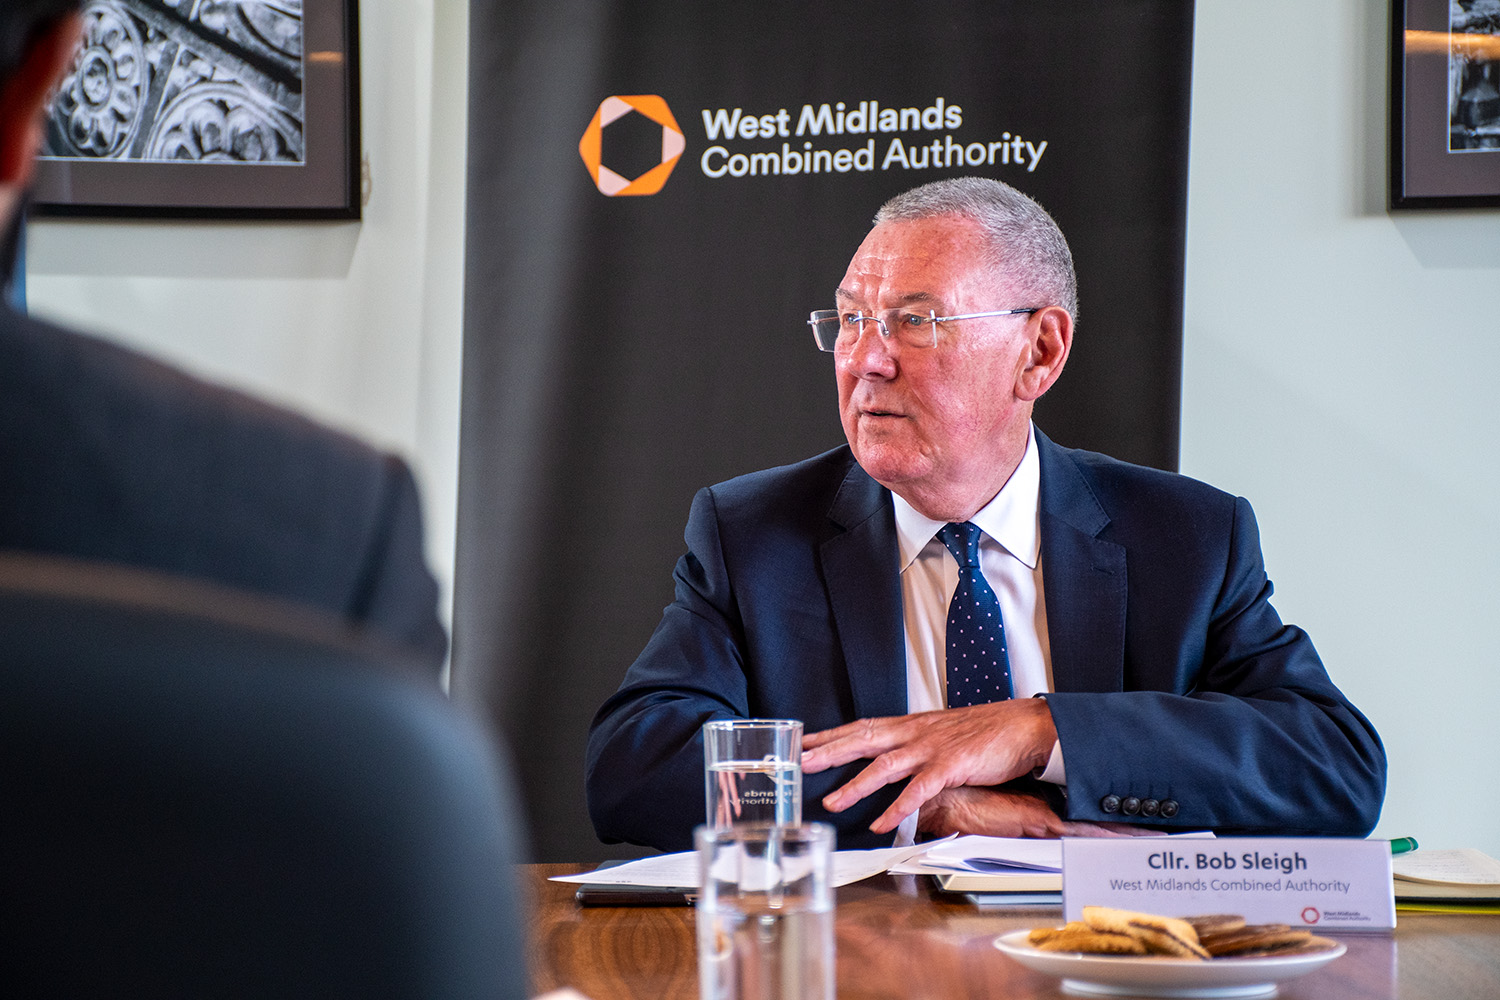 Deputy Mayor of the West Midlands, Cllr Bob Sleigh OBE, discussing West Midlands' infrastructure during a meeting with the NIC.